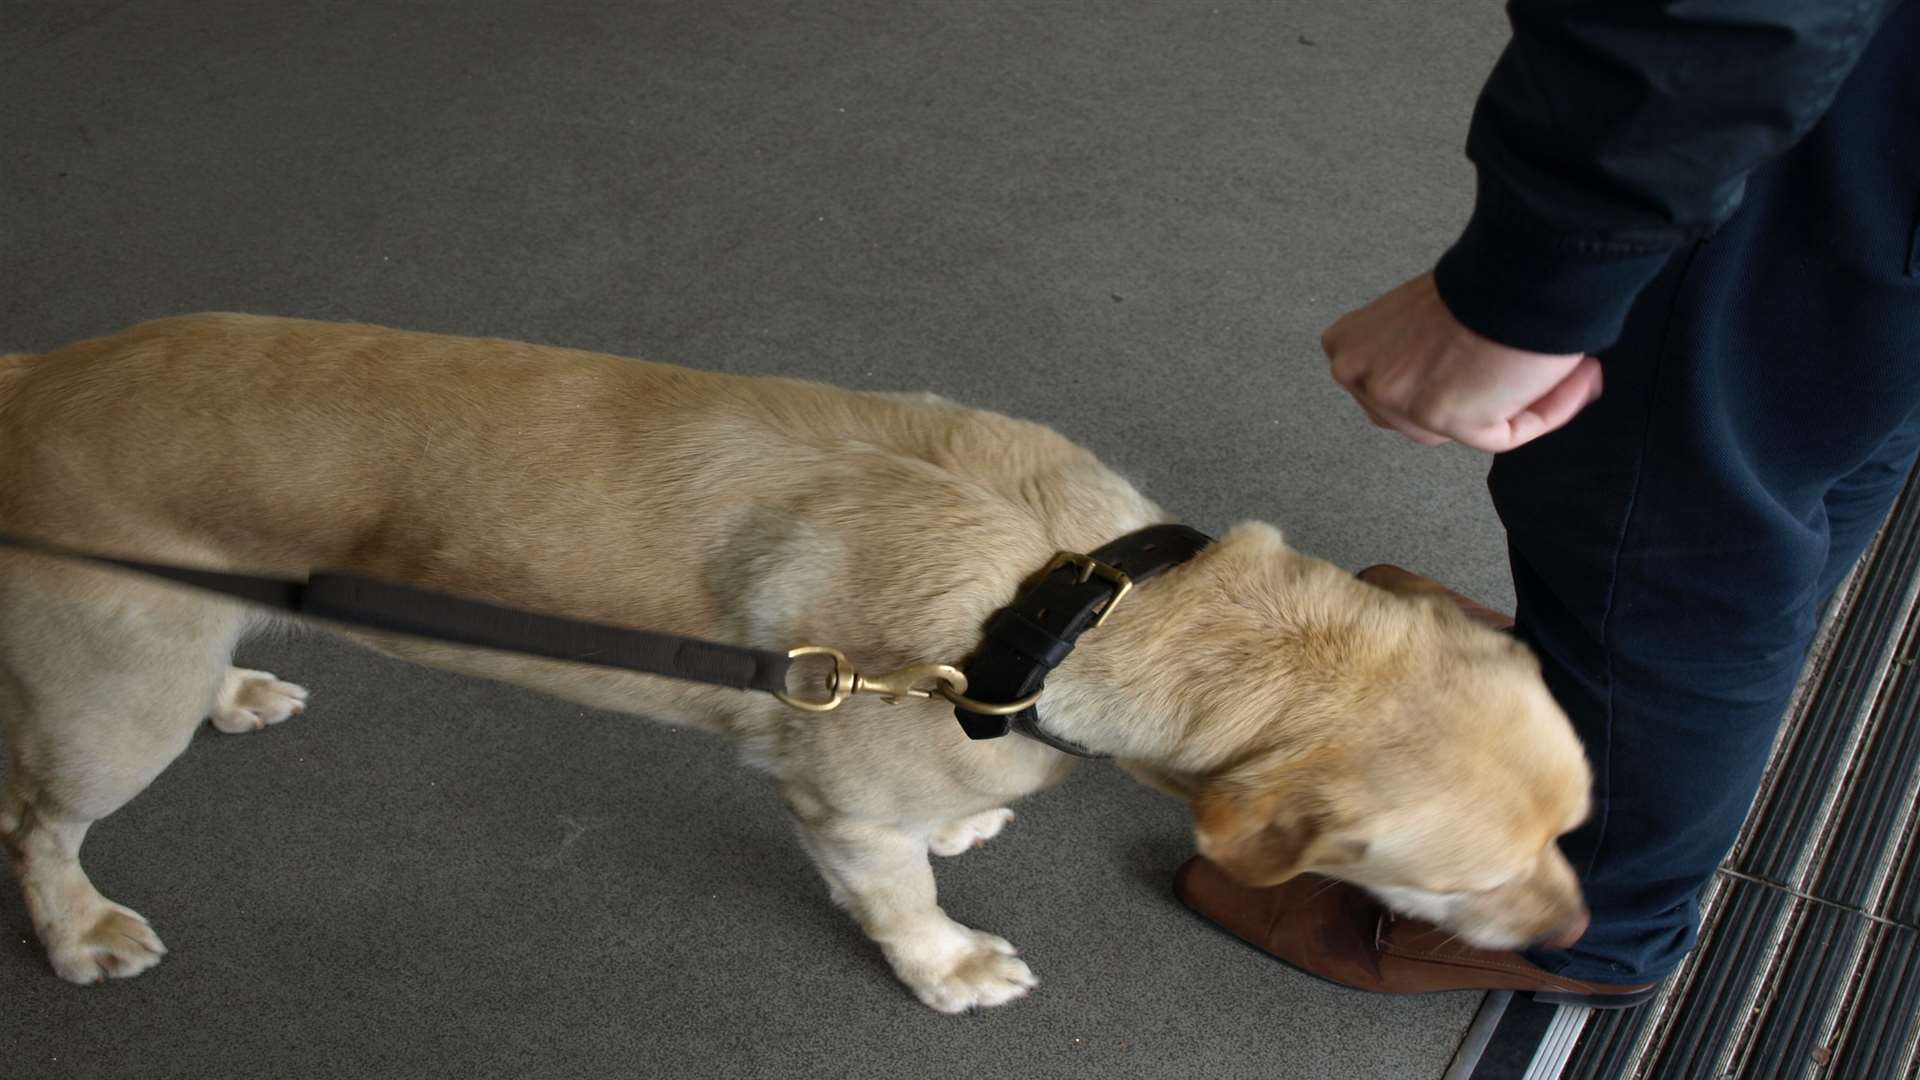 A police sniffer dog at work.